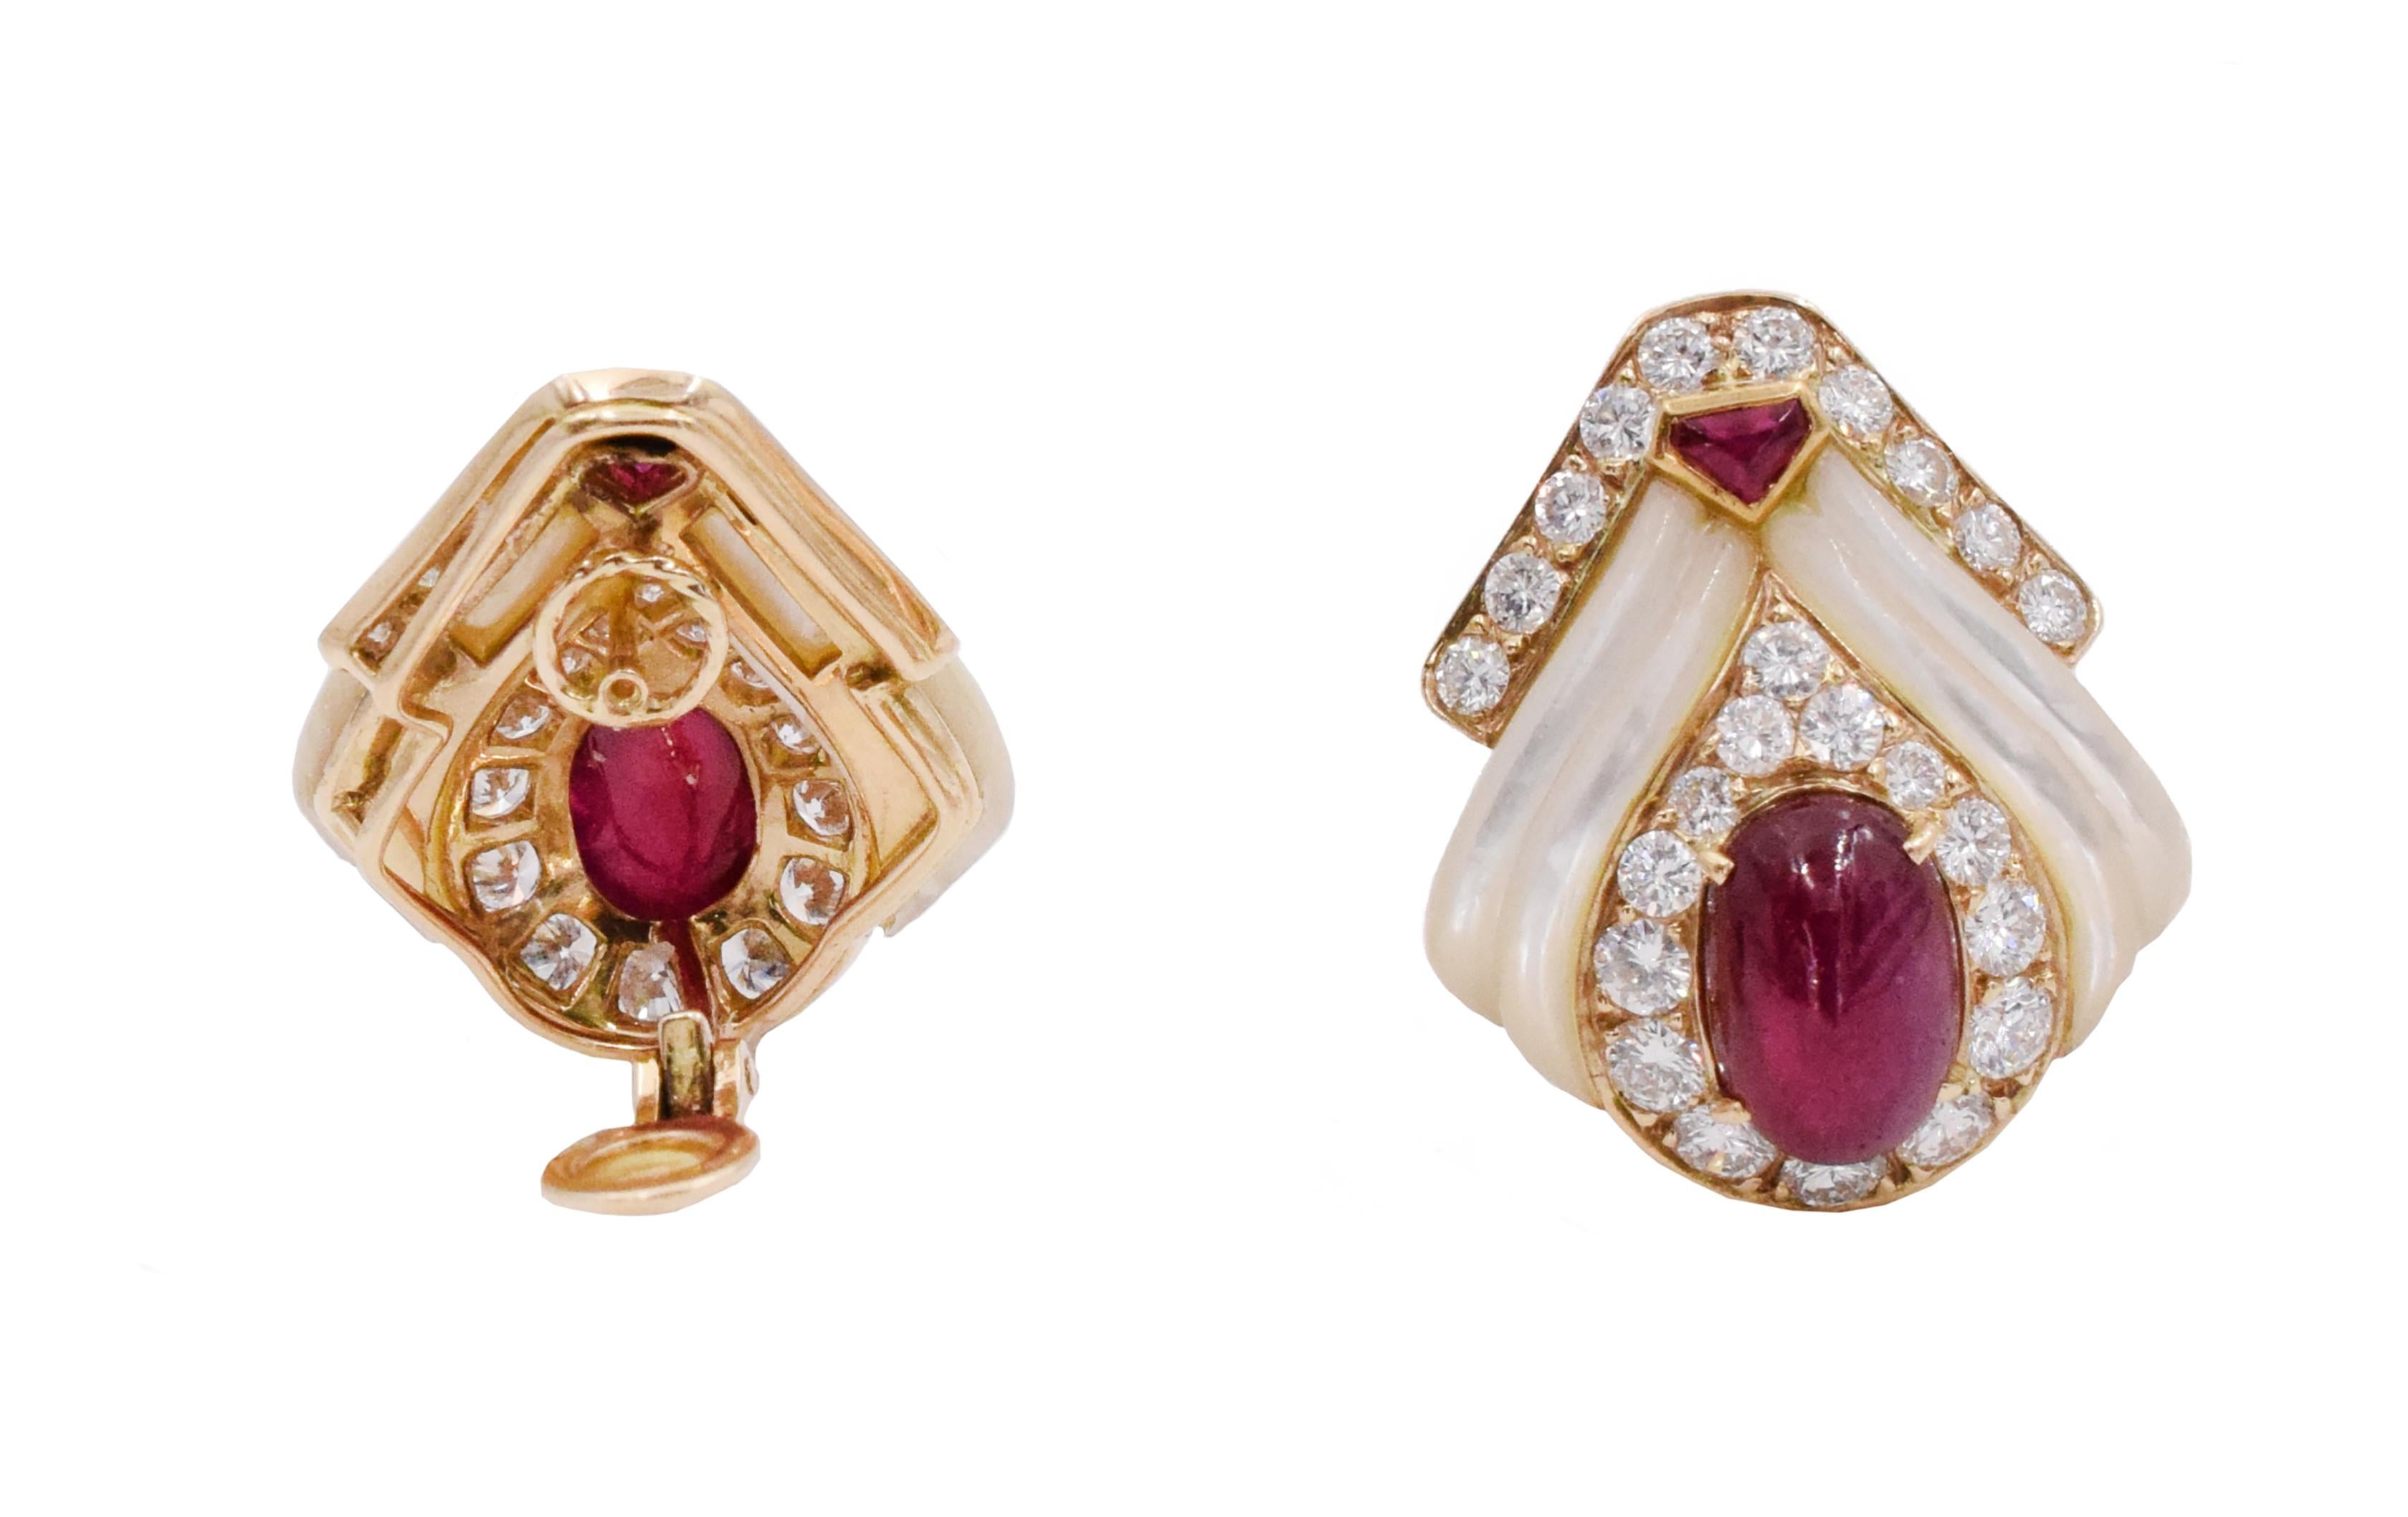 Mauboussin Paris ruby, mother of pearl and diamond ear clip earrings. .Consisting of two oval shape cabochon cut rubies in the center, and two smaller cabochon cut rubies on the top of the earrings. Accented by 50 round brilliant cut diamonds